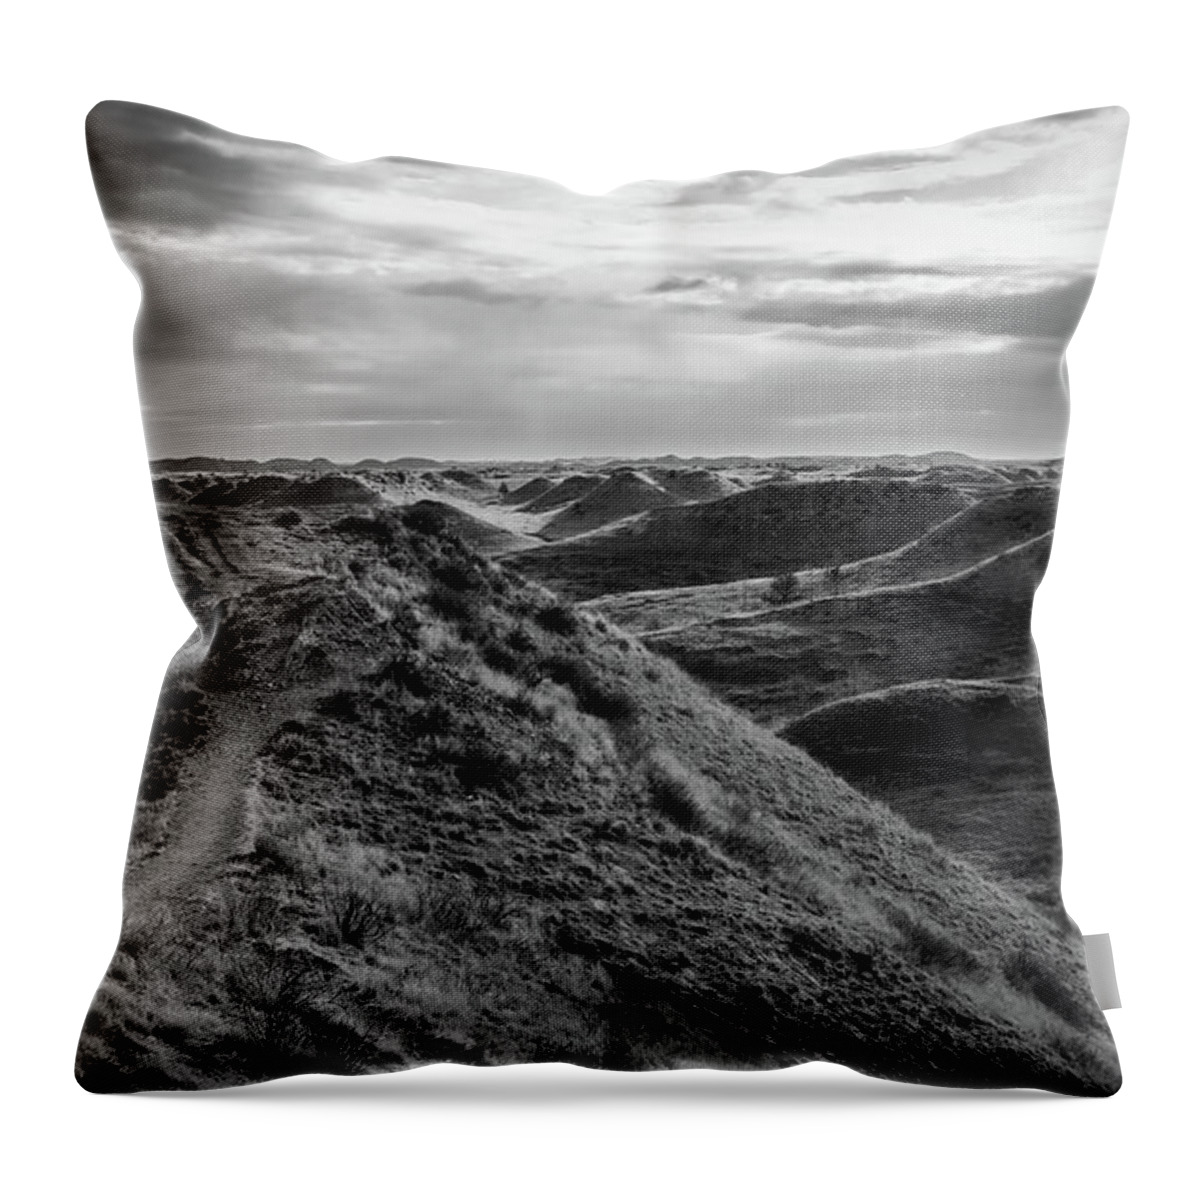 Badlands Hiking Trail Throw Pillow featuring the photograph Through The Badlands Black And White by Dan Sproul